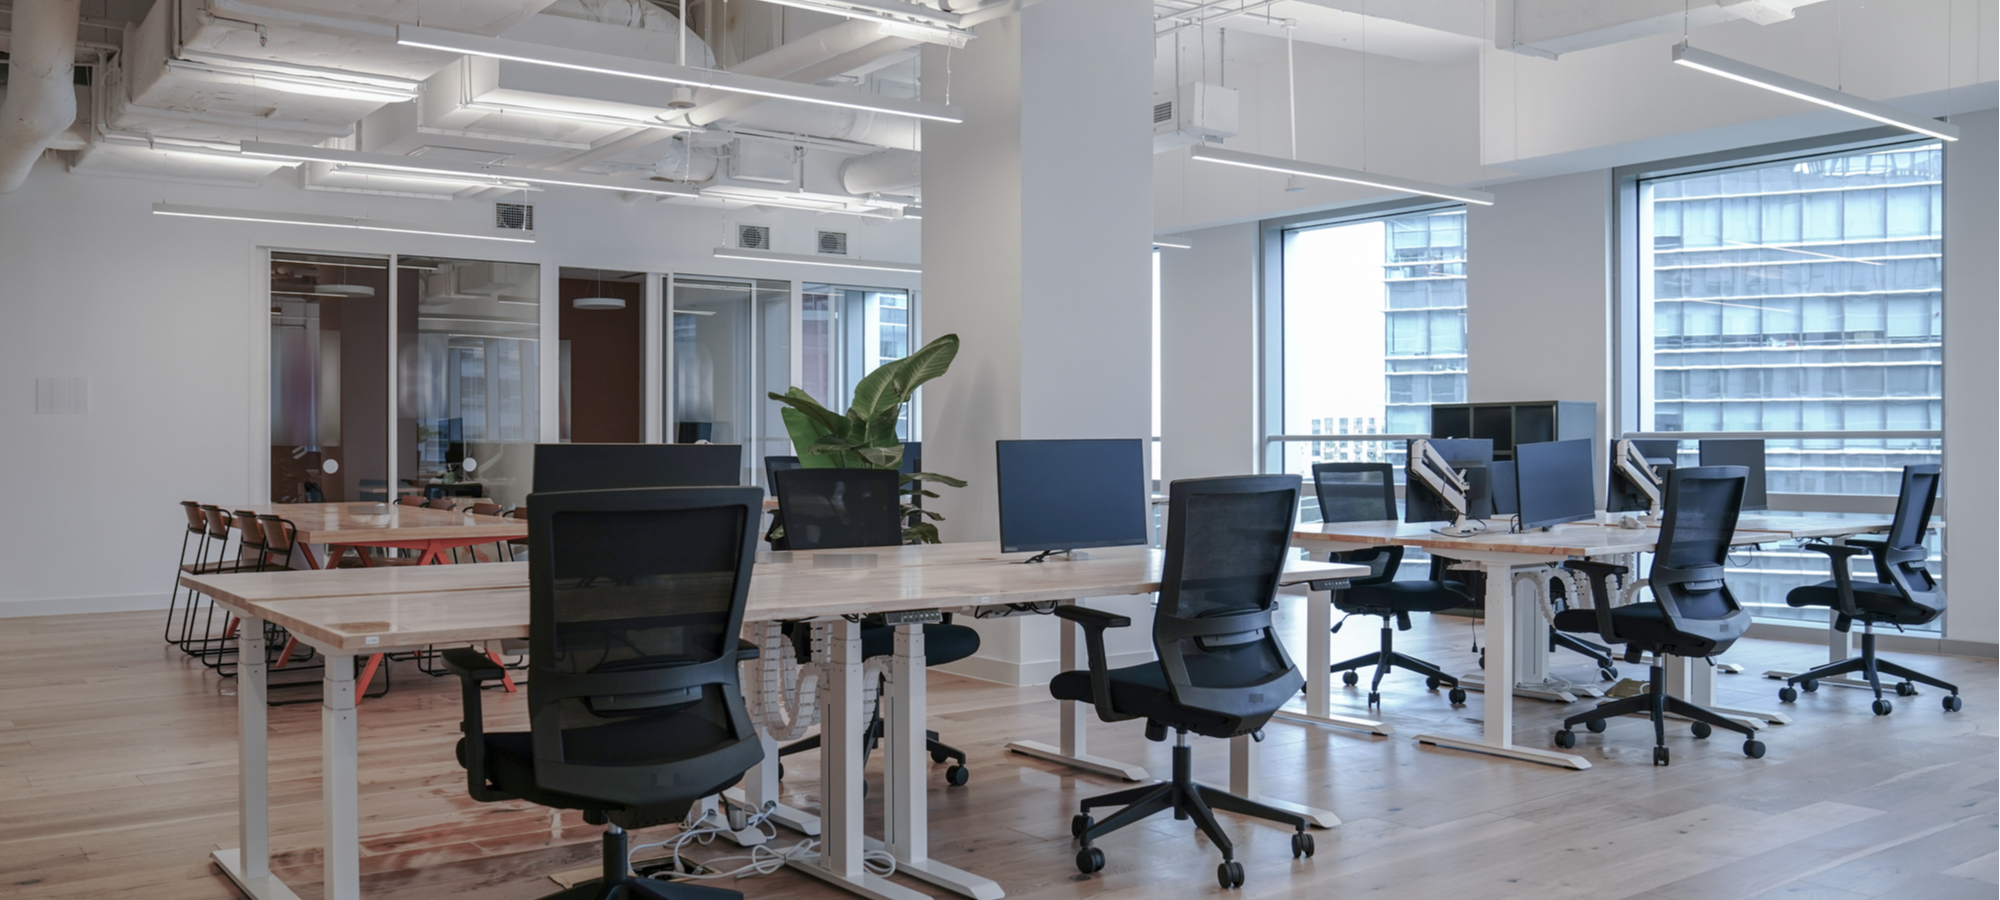 Discover the Benefits of Ergonomic Furniture for Your Office